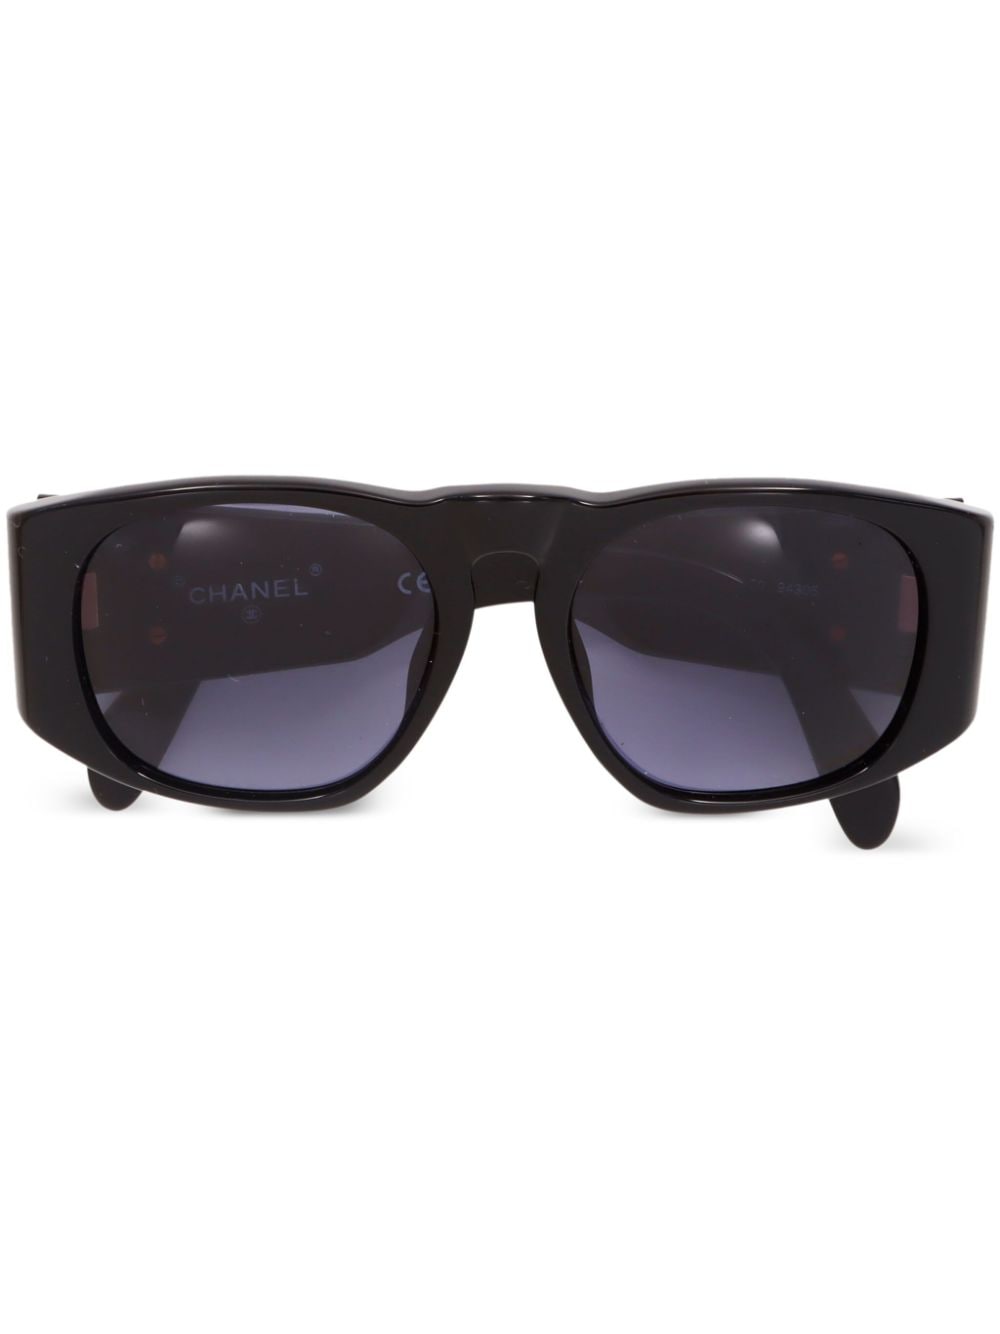 CHANEL Pre-Owned 2000s CC D-frame sunglasses - Black